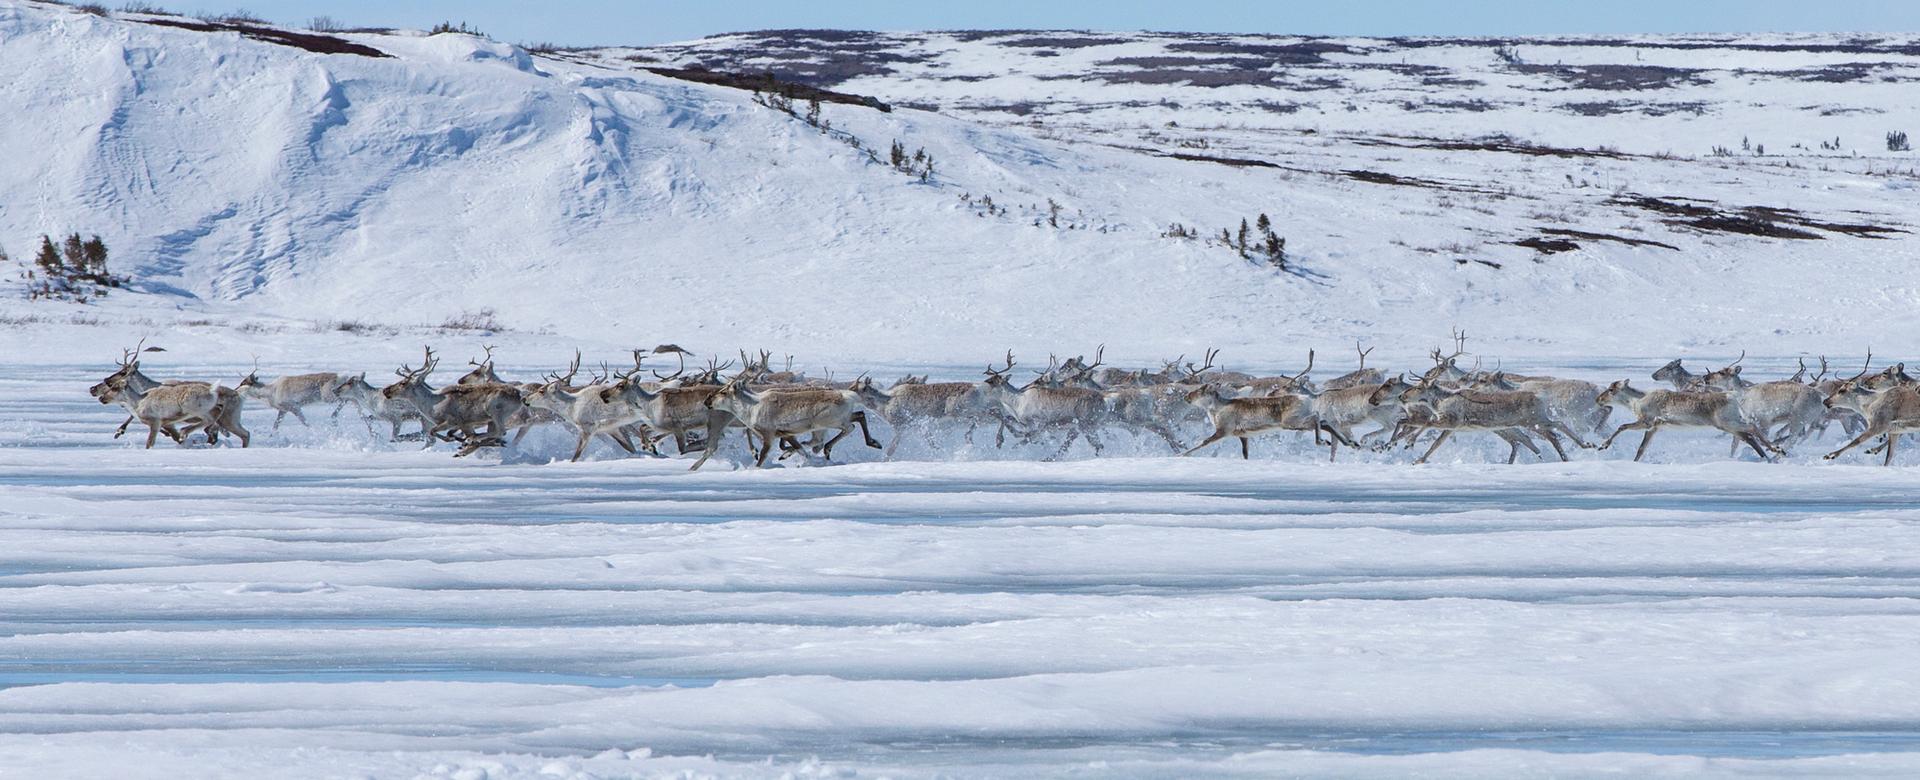 Over 300,000 caribou migrate past the Arctic Haven Wilderness Lodge each spring. 